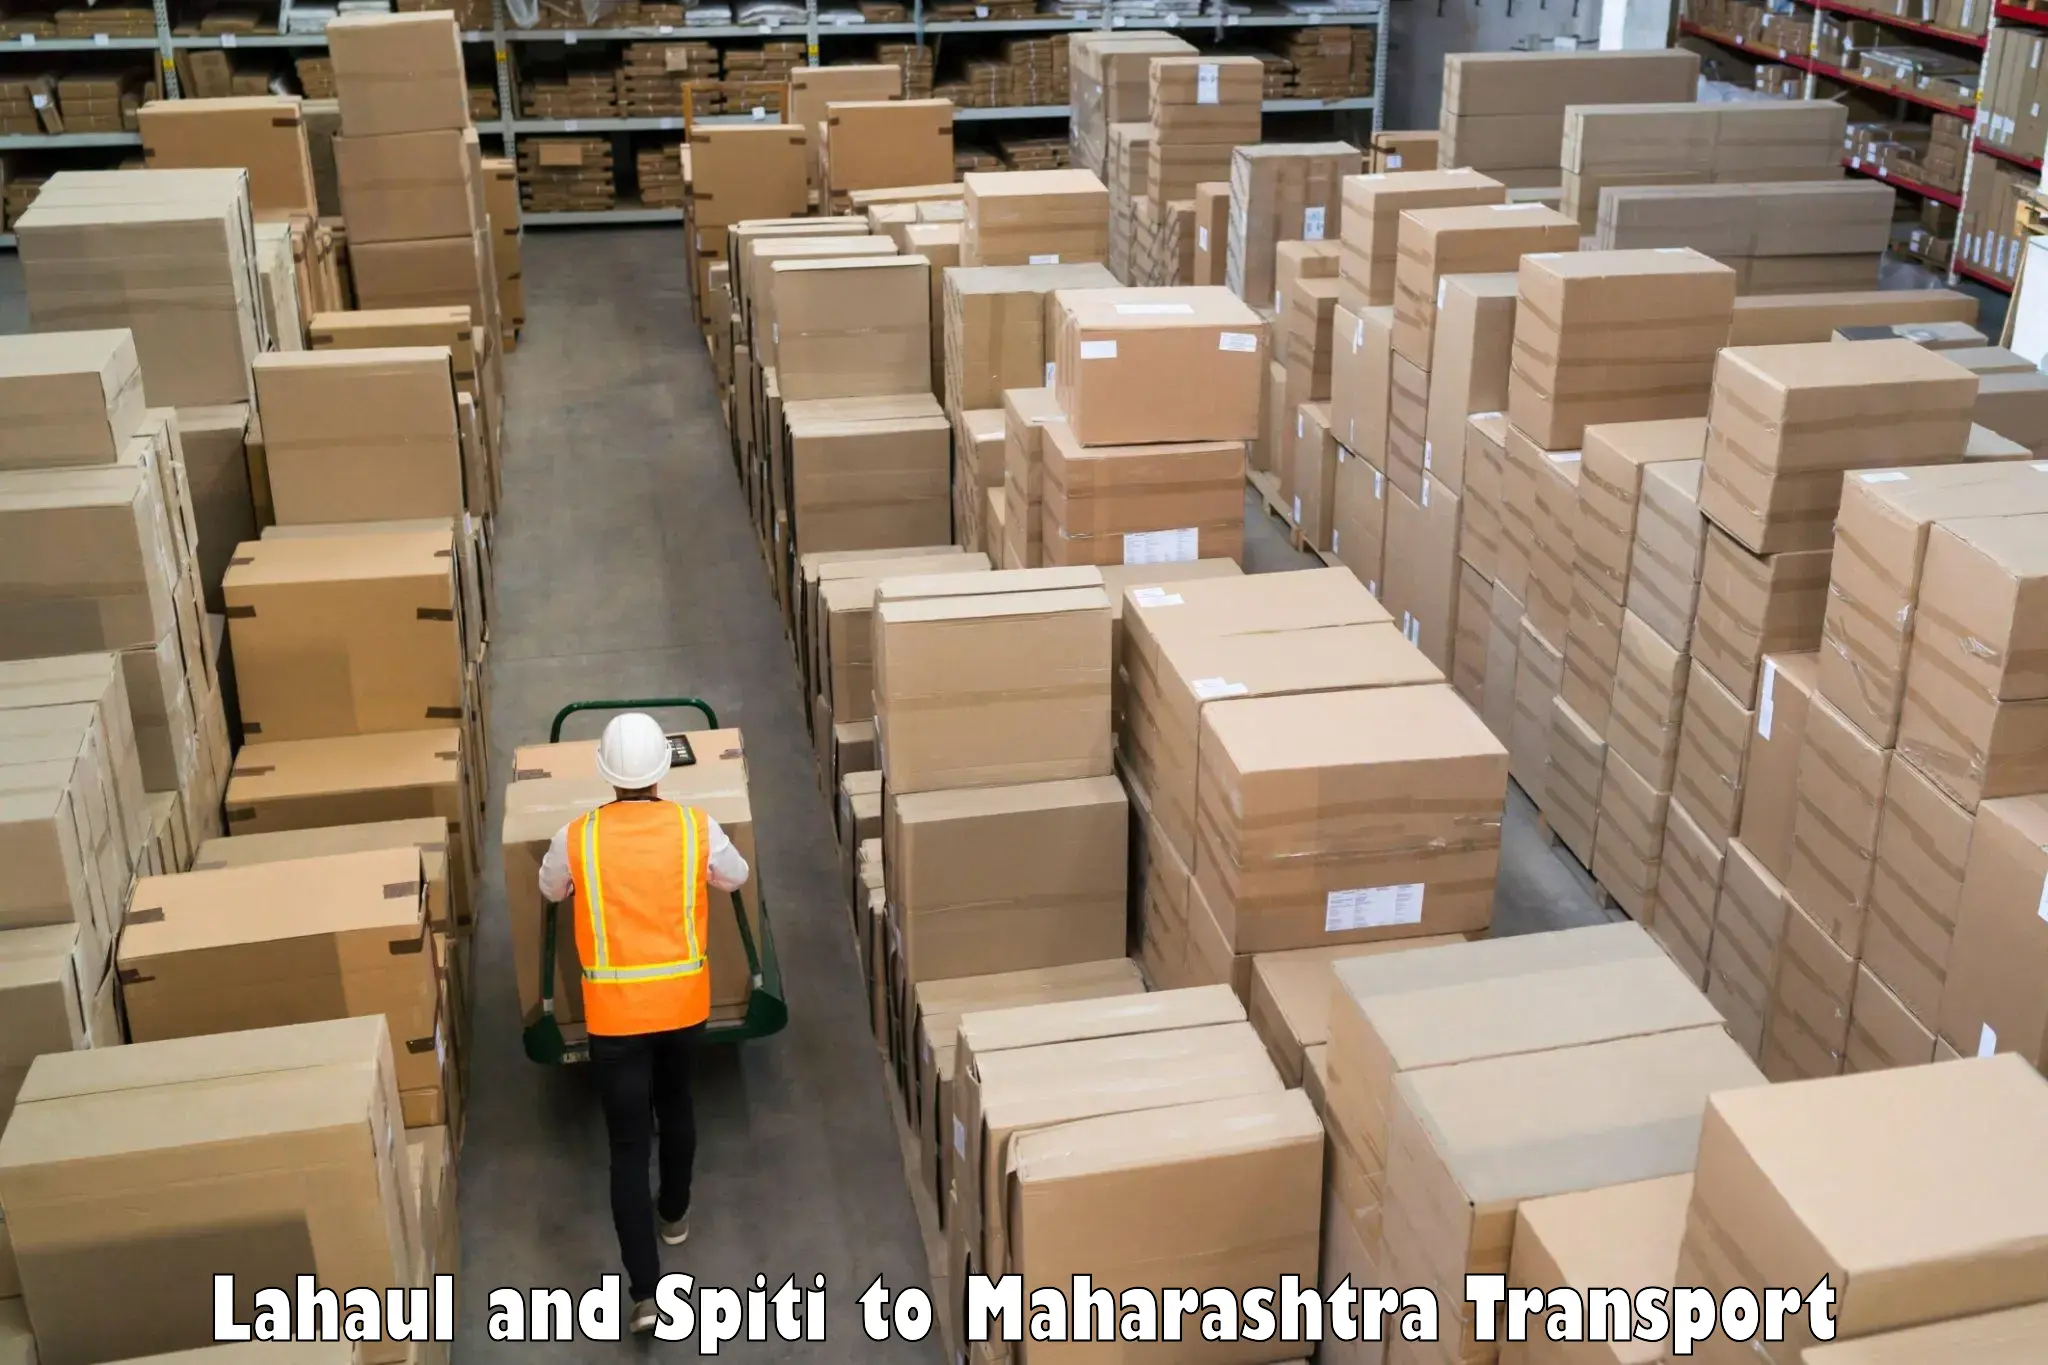 Container transport service Lahaul and Spiti to Paratwada